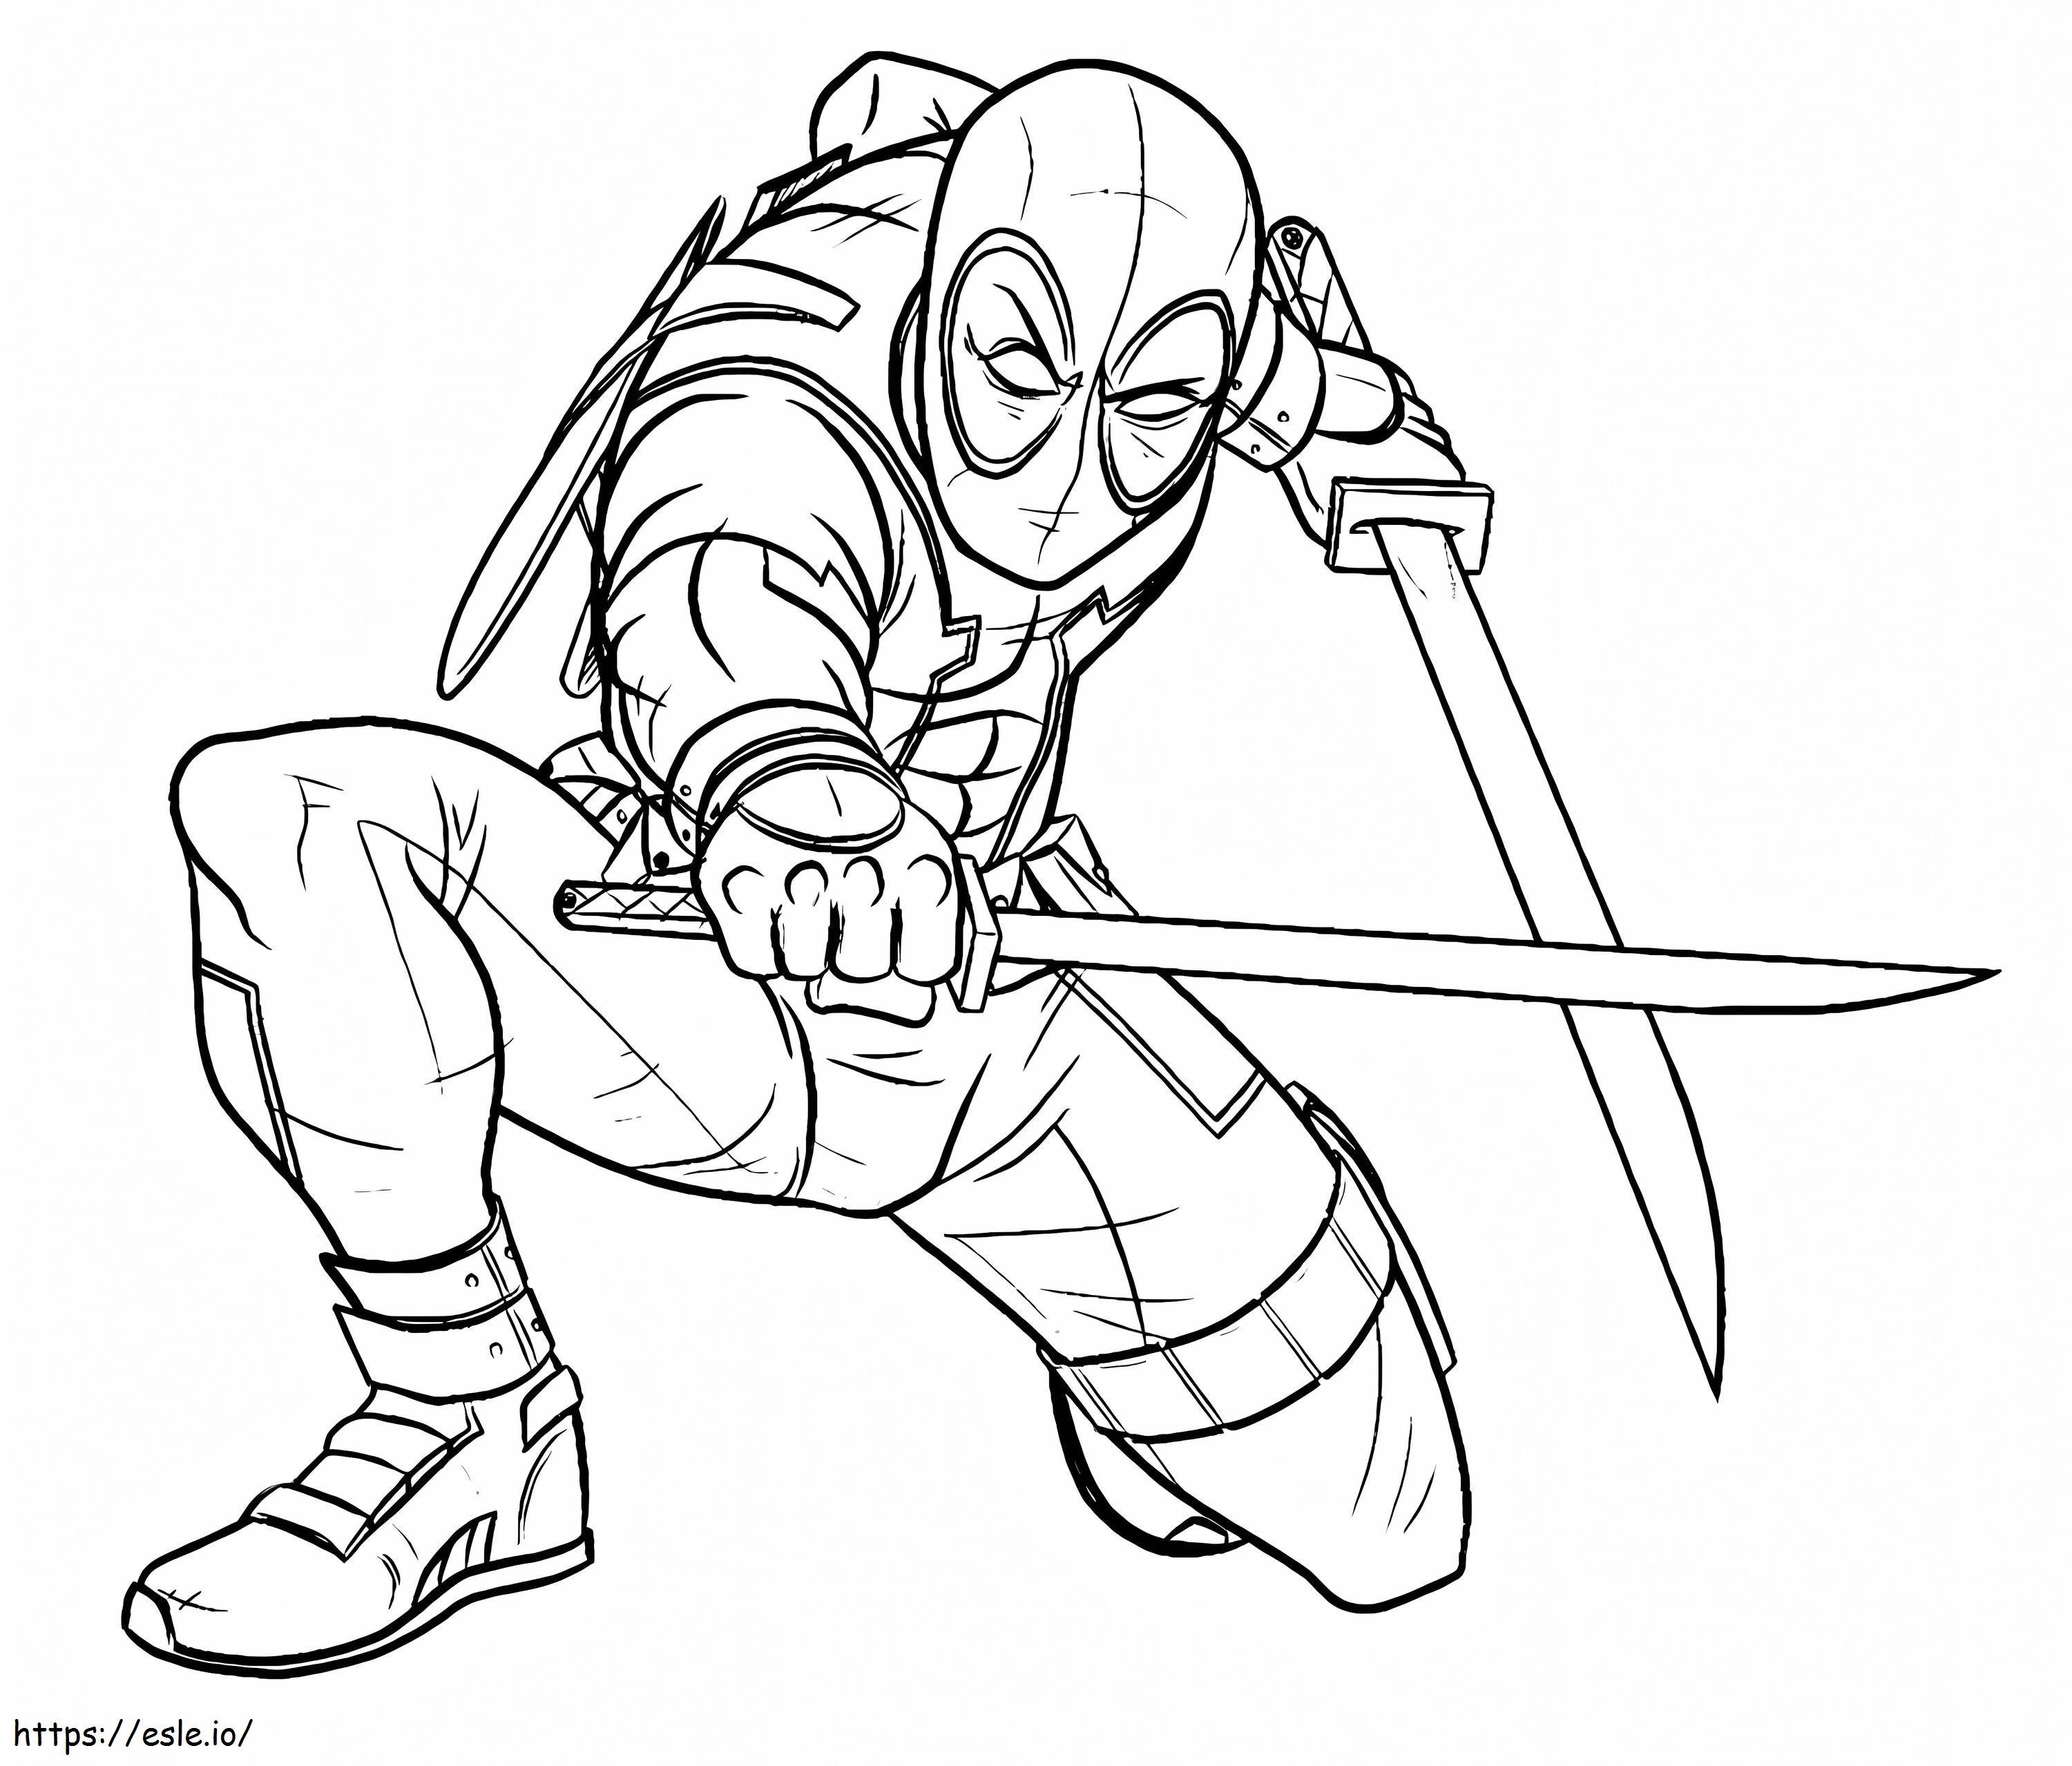 Lucha The Deadpool coloring page